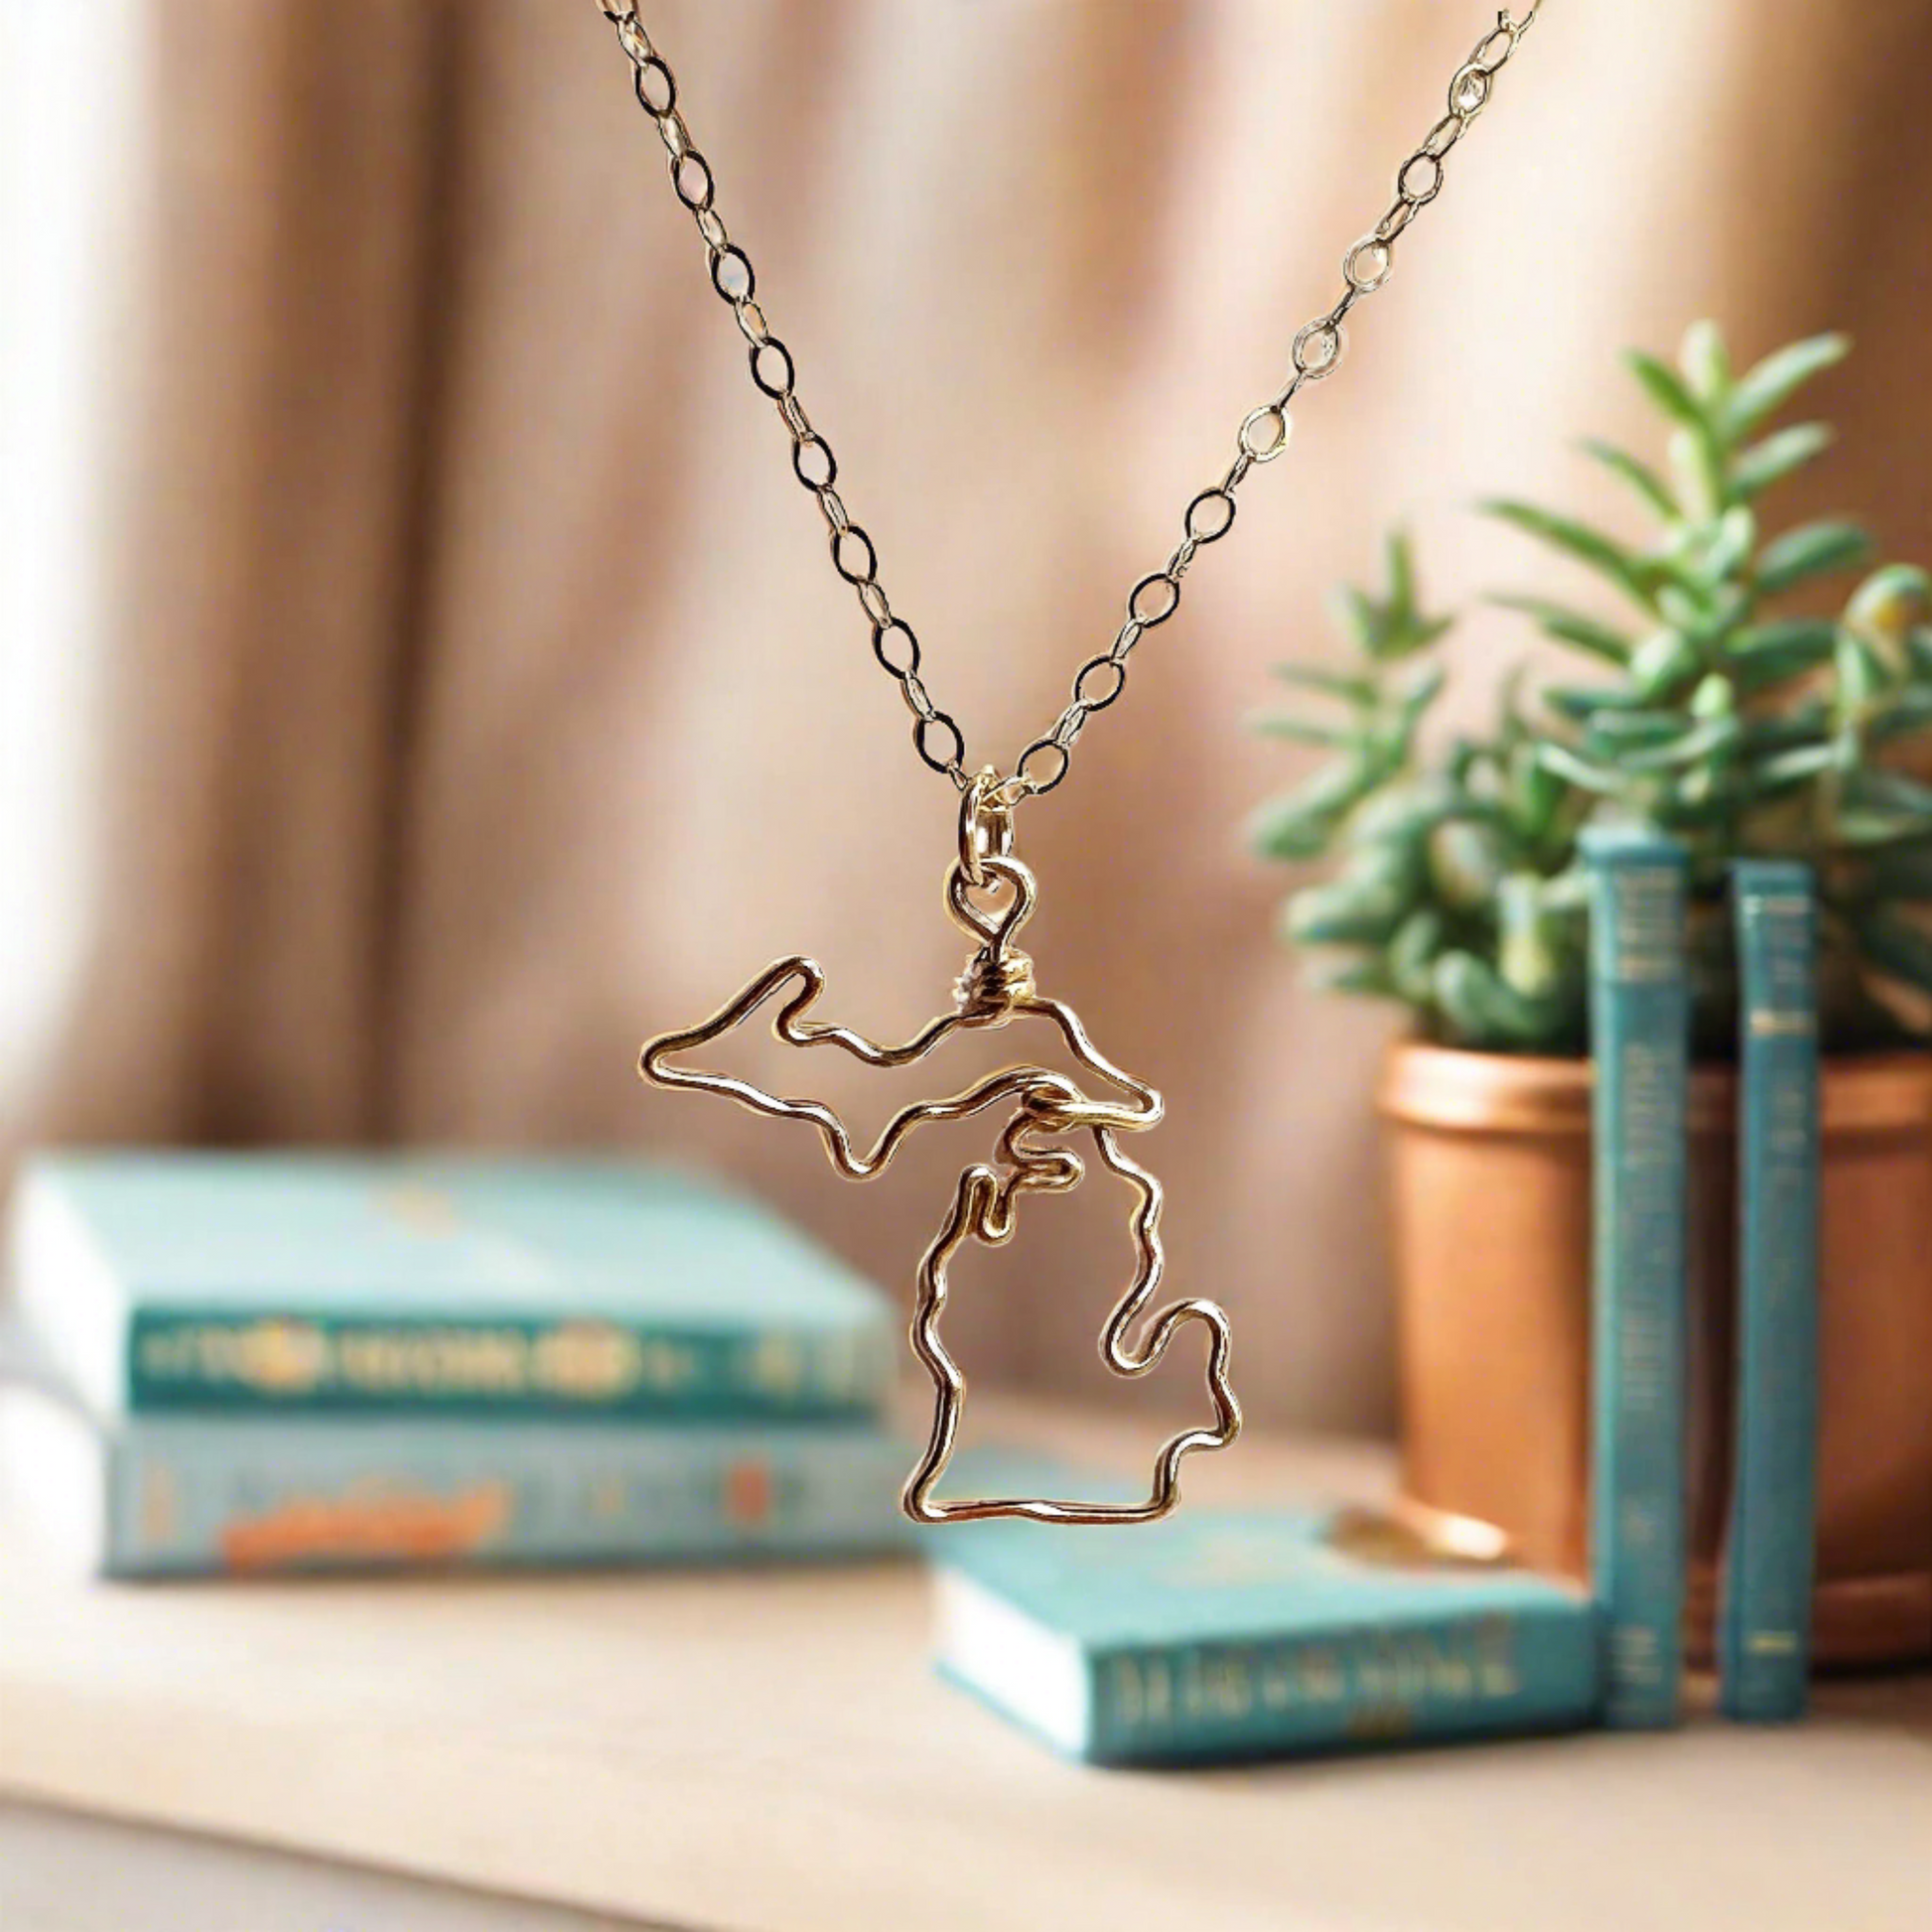 gold Michigan necklace with books and plants and sunlight in the background 